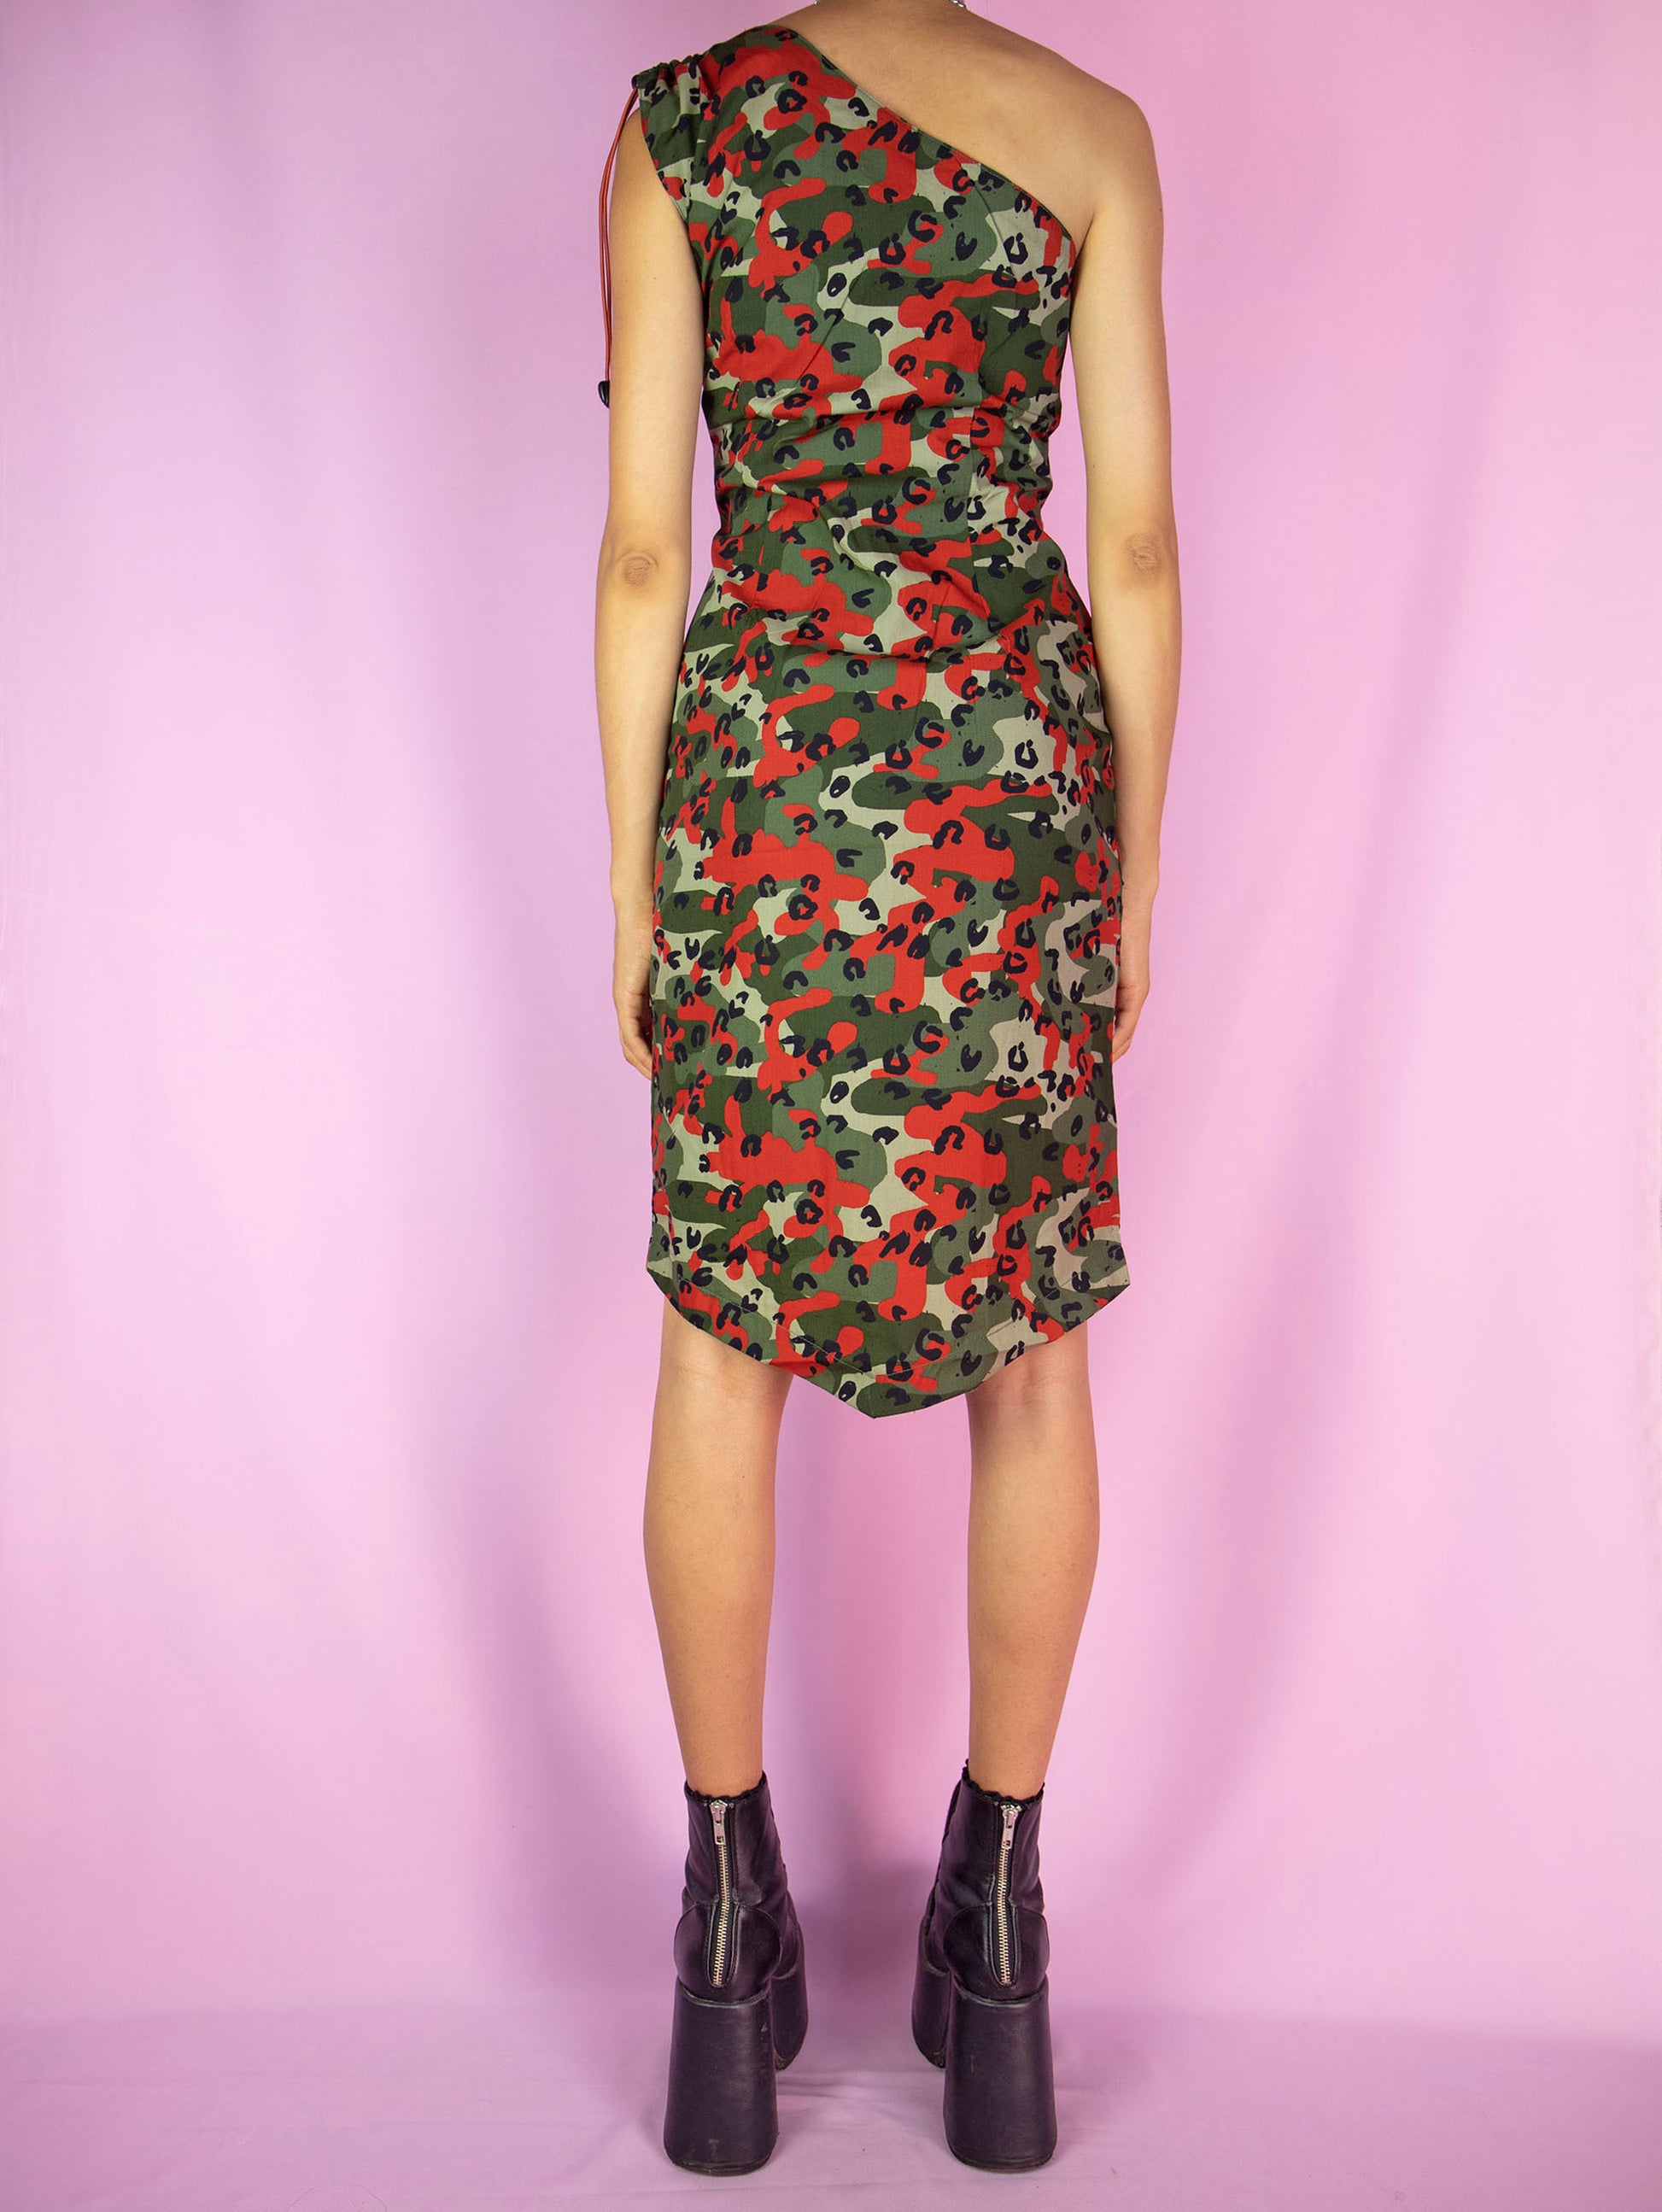 The Y2K Camouflage Print Mini Dress is a vintage red and green camo one-shoulder fitted pencil dress featuring a zippered front slit. Cyber grunge 2000s festival rave party mini dress. Excellent vintage condition.